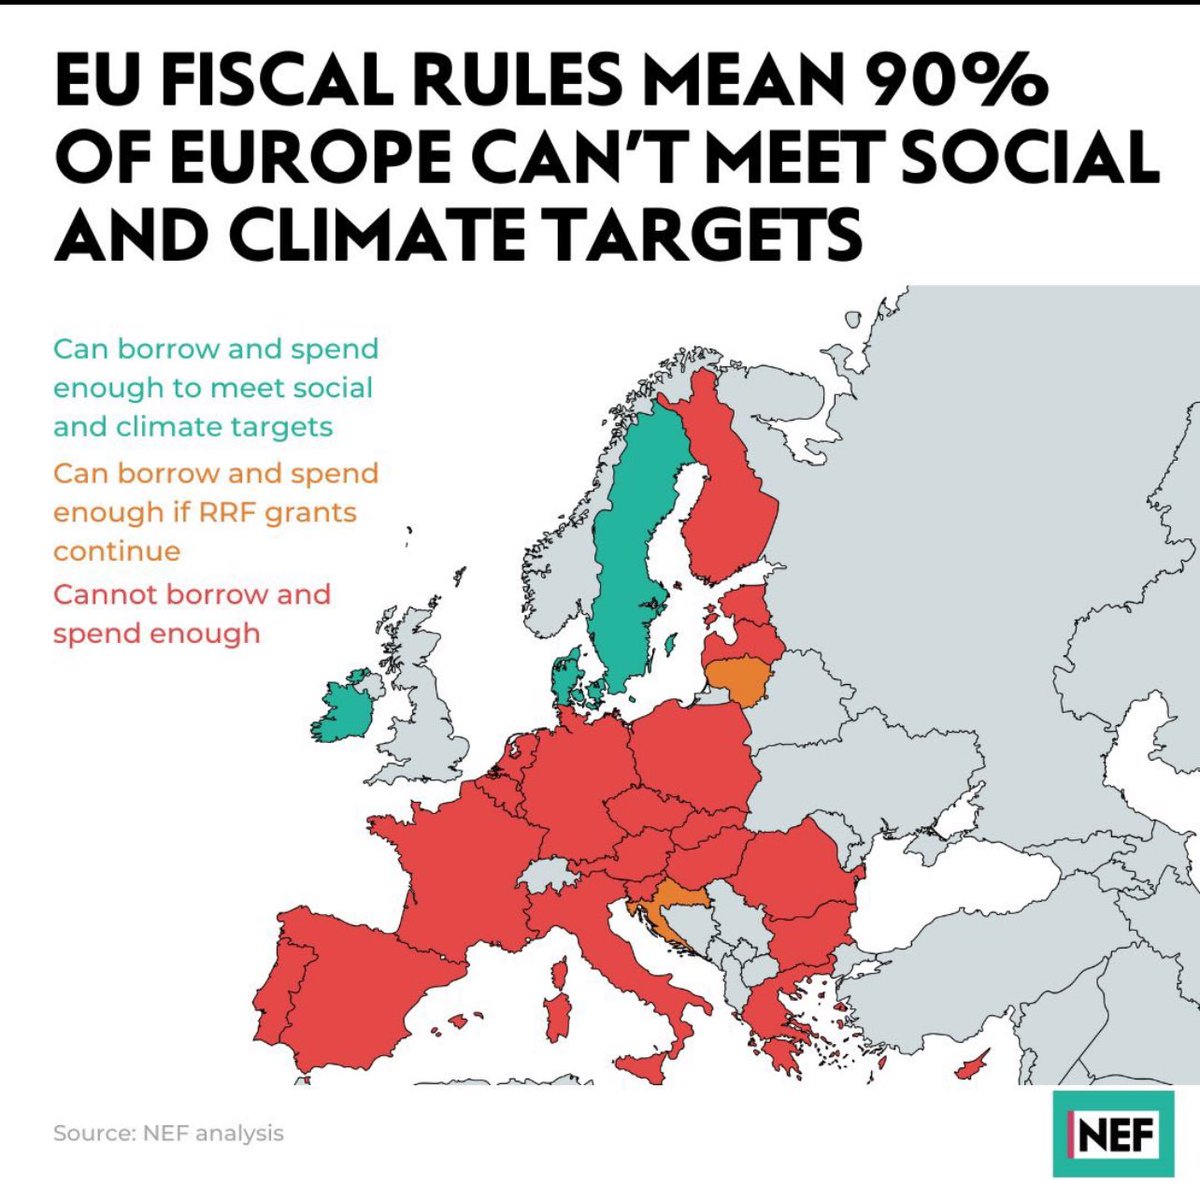 MEPs must reject new economic governance rules that will bring back austerity ‼️Spread the word ahead of next weeks vote 🗳️ in the @Europarl_EN ‼️ check out @EPSUnions post 🔹RT it 🔸Tag your MEPs Here is the link👇🏾 twitter.com/EPSUnions/stat…